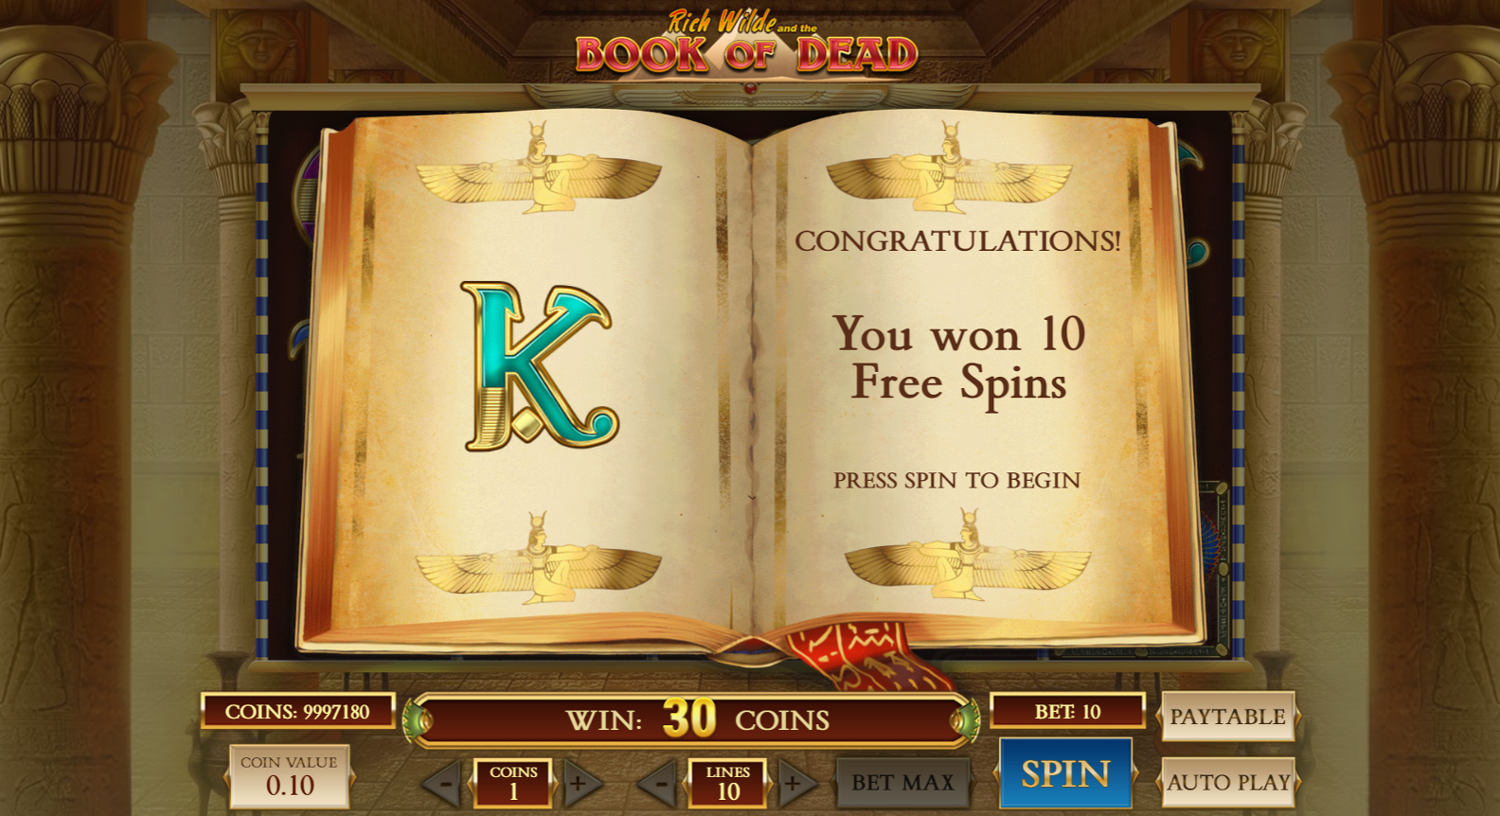 No Deposit Free Spins on Book of Dead